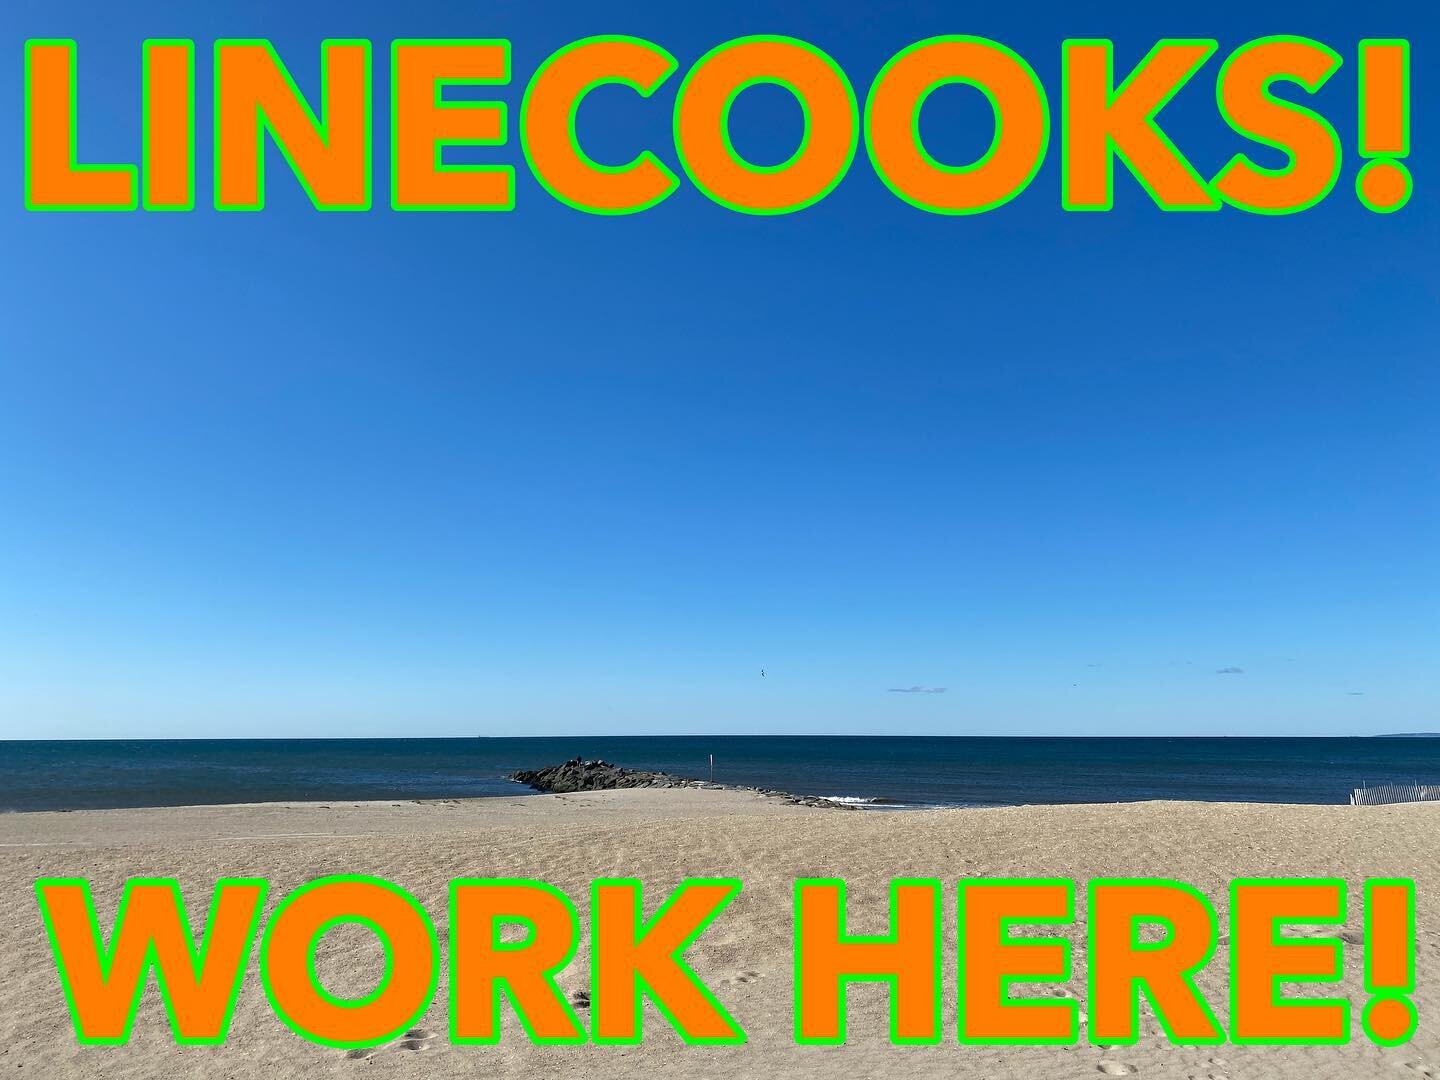 Looking for a better kitchen environment? Looking to make more money this summer? Looking for a low risk covid safe place to work? Enjoy working hard and having fun? Rippers is looking for you! 

Rippers is hiring line cooks, prep cooks and porters! 